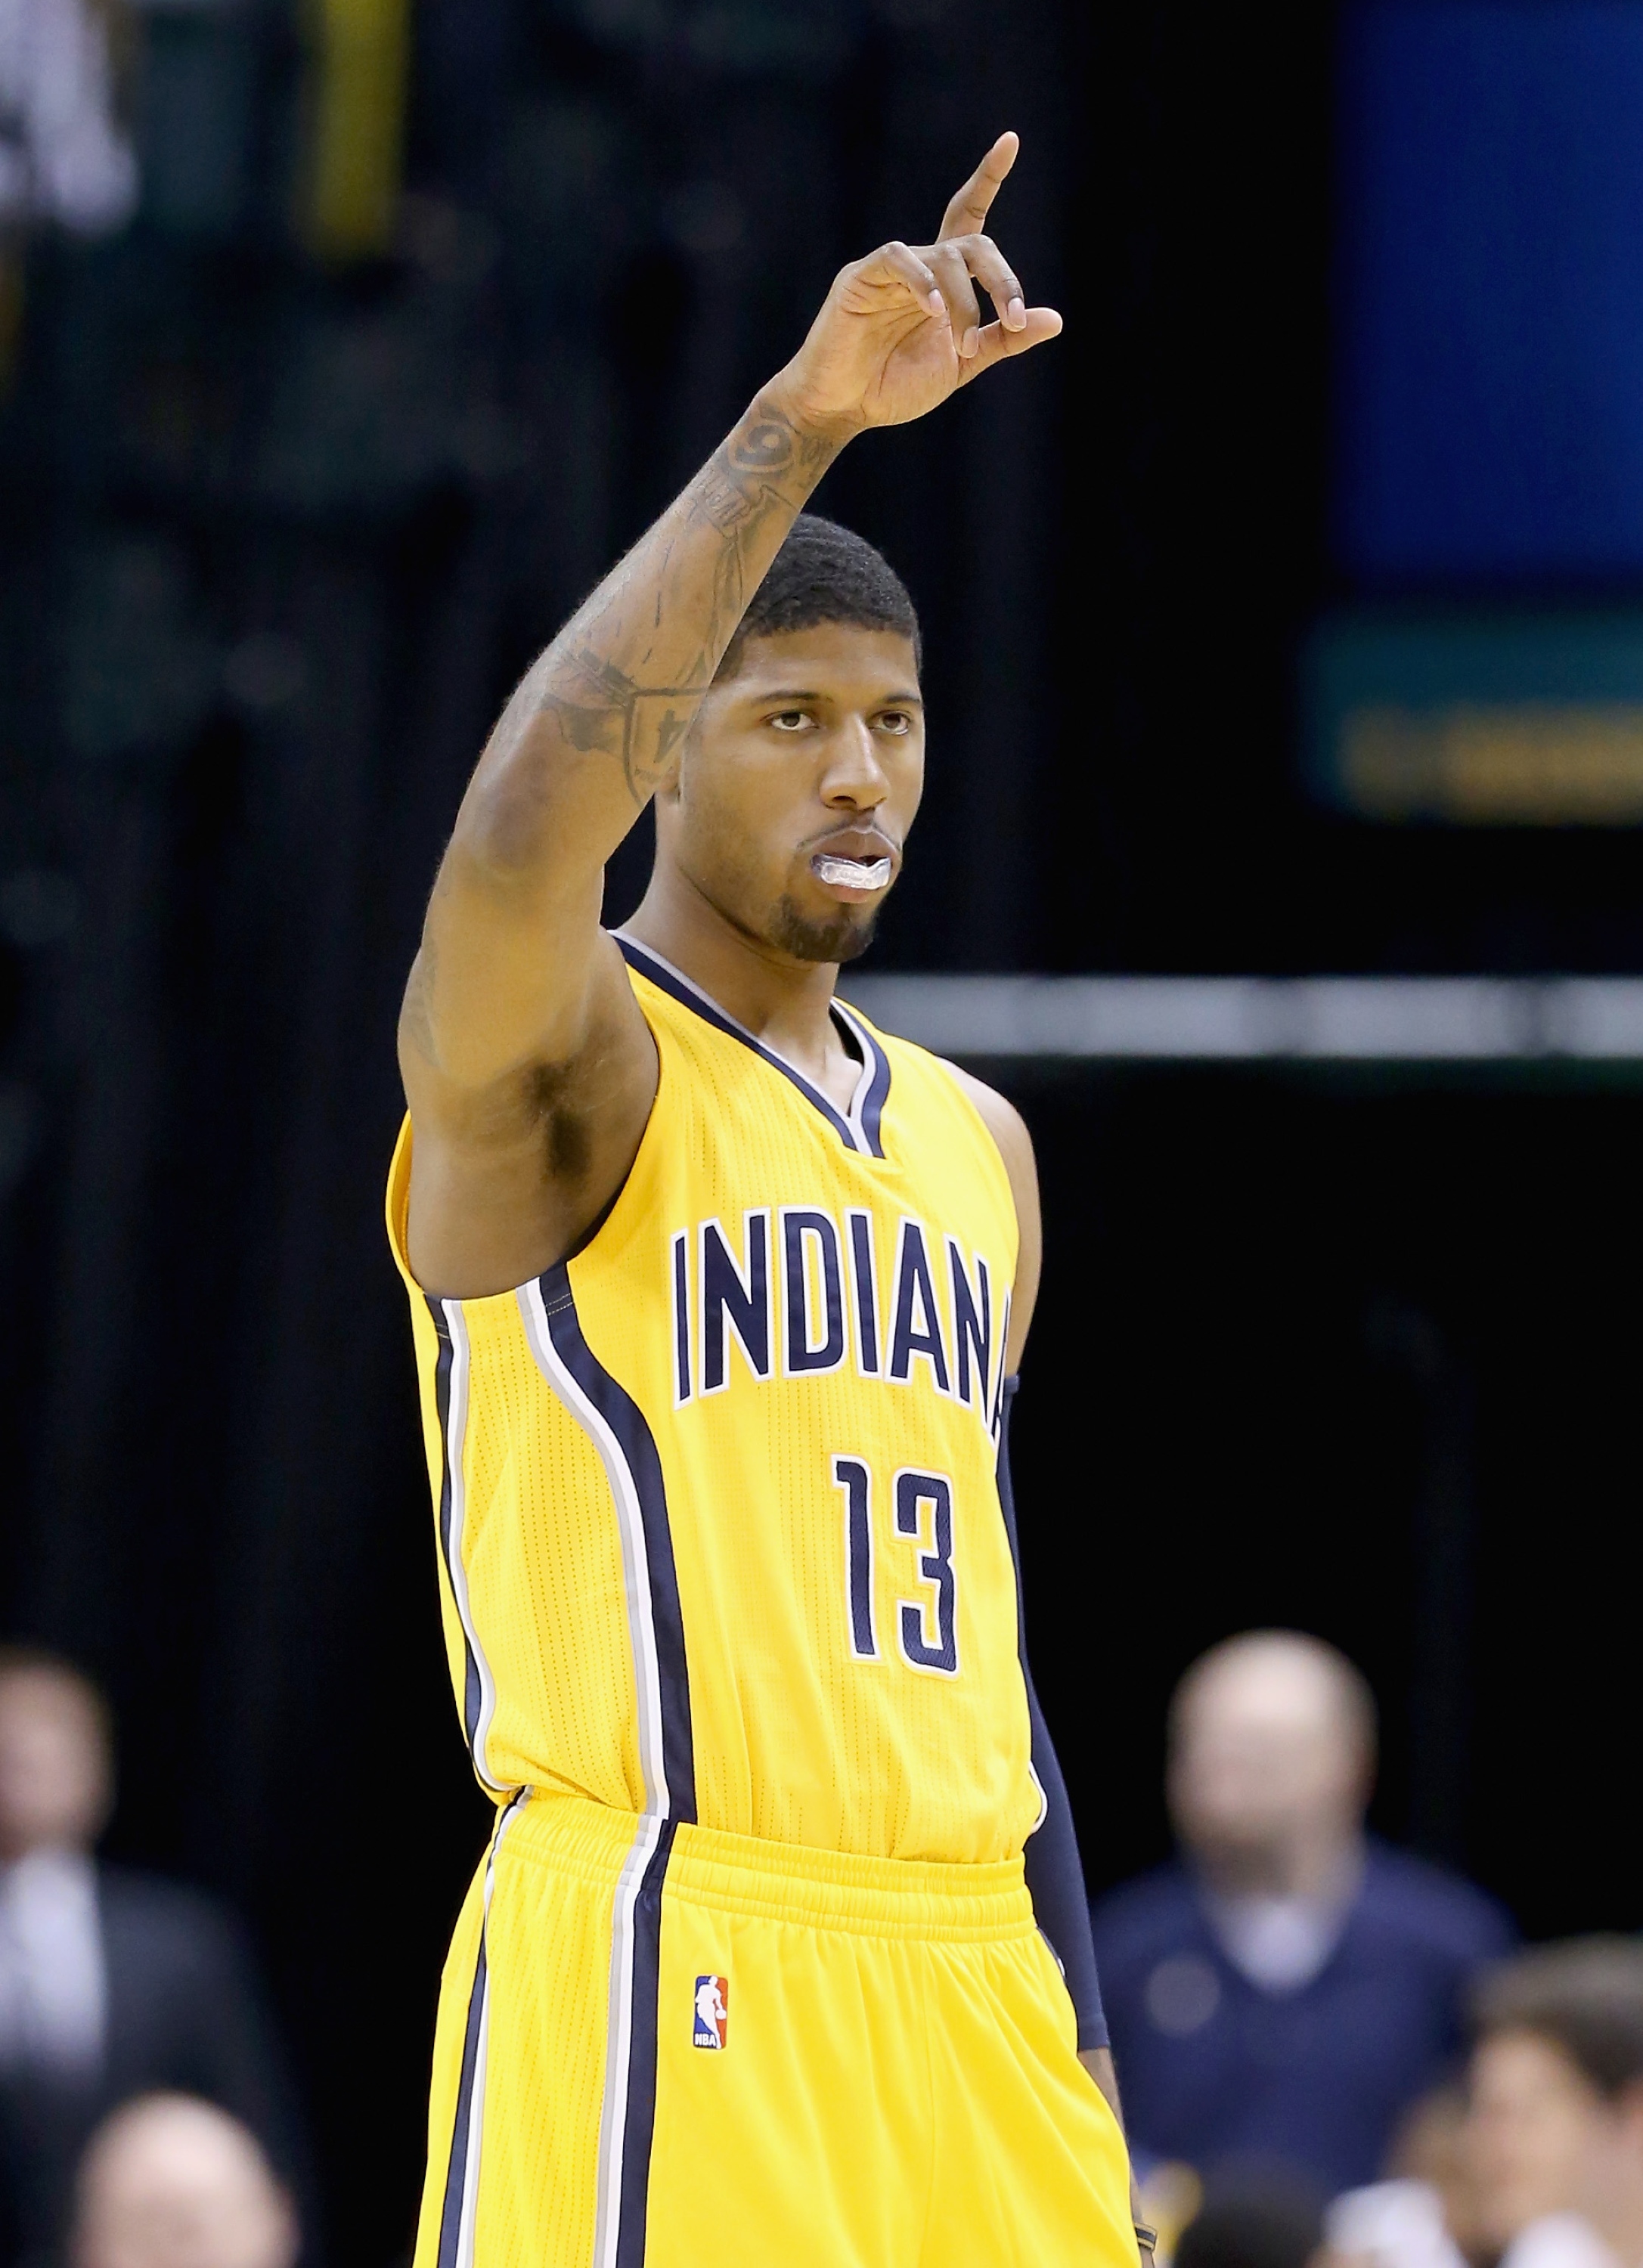 INDIANAPOLIS, IN - APRIL 05: Paul George #13 of the Indiana Pacers celebrates in the game against the Miami Heat at Bankers Life Fieldhouse on April 5, 2015 in Indianapolis, Indiana. Tonight is his first game this season . NOTE TO USER: User expressly acknowledges and agrees that, by downloading and or using this photograph, User is consenting to the terms and conditions of the Getty Images License Agreement. (Photo by Andy Lyons/Getty Images)